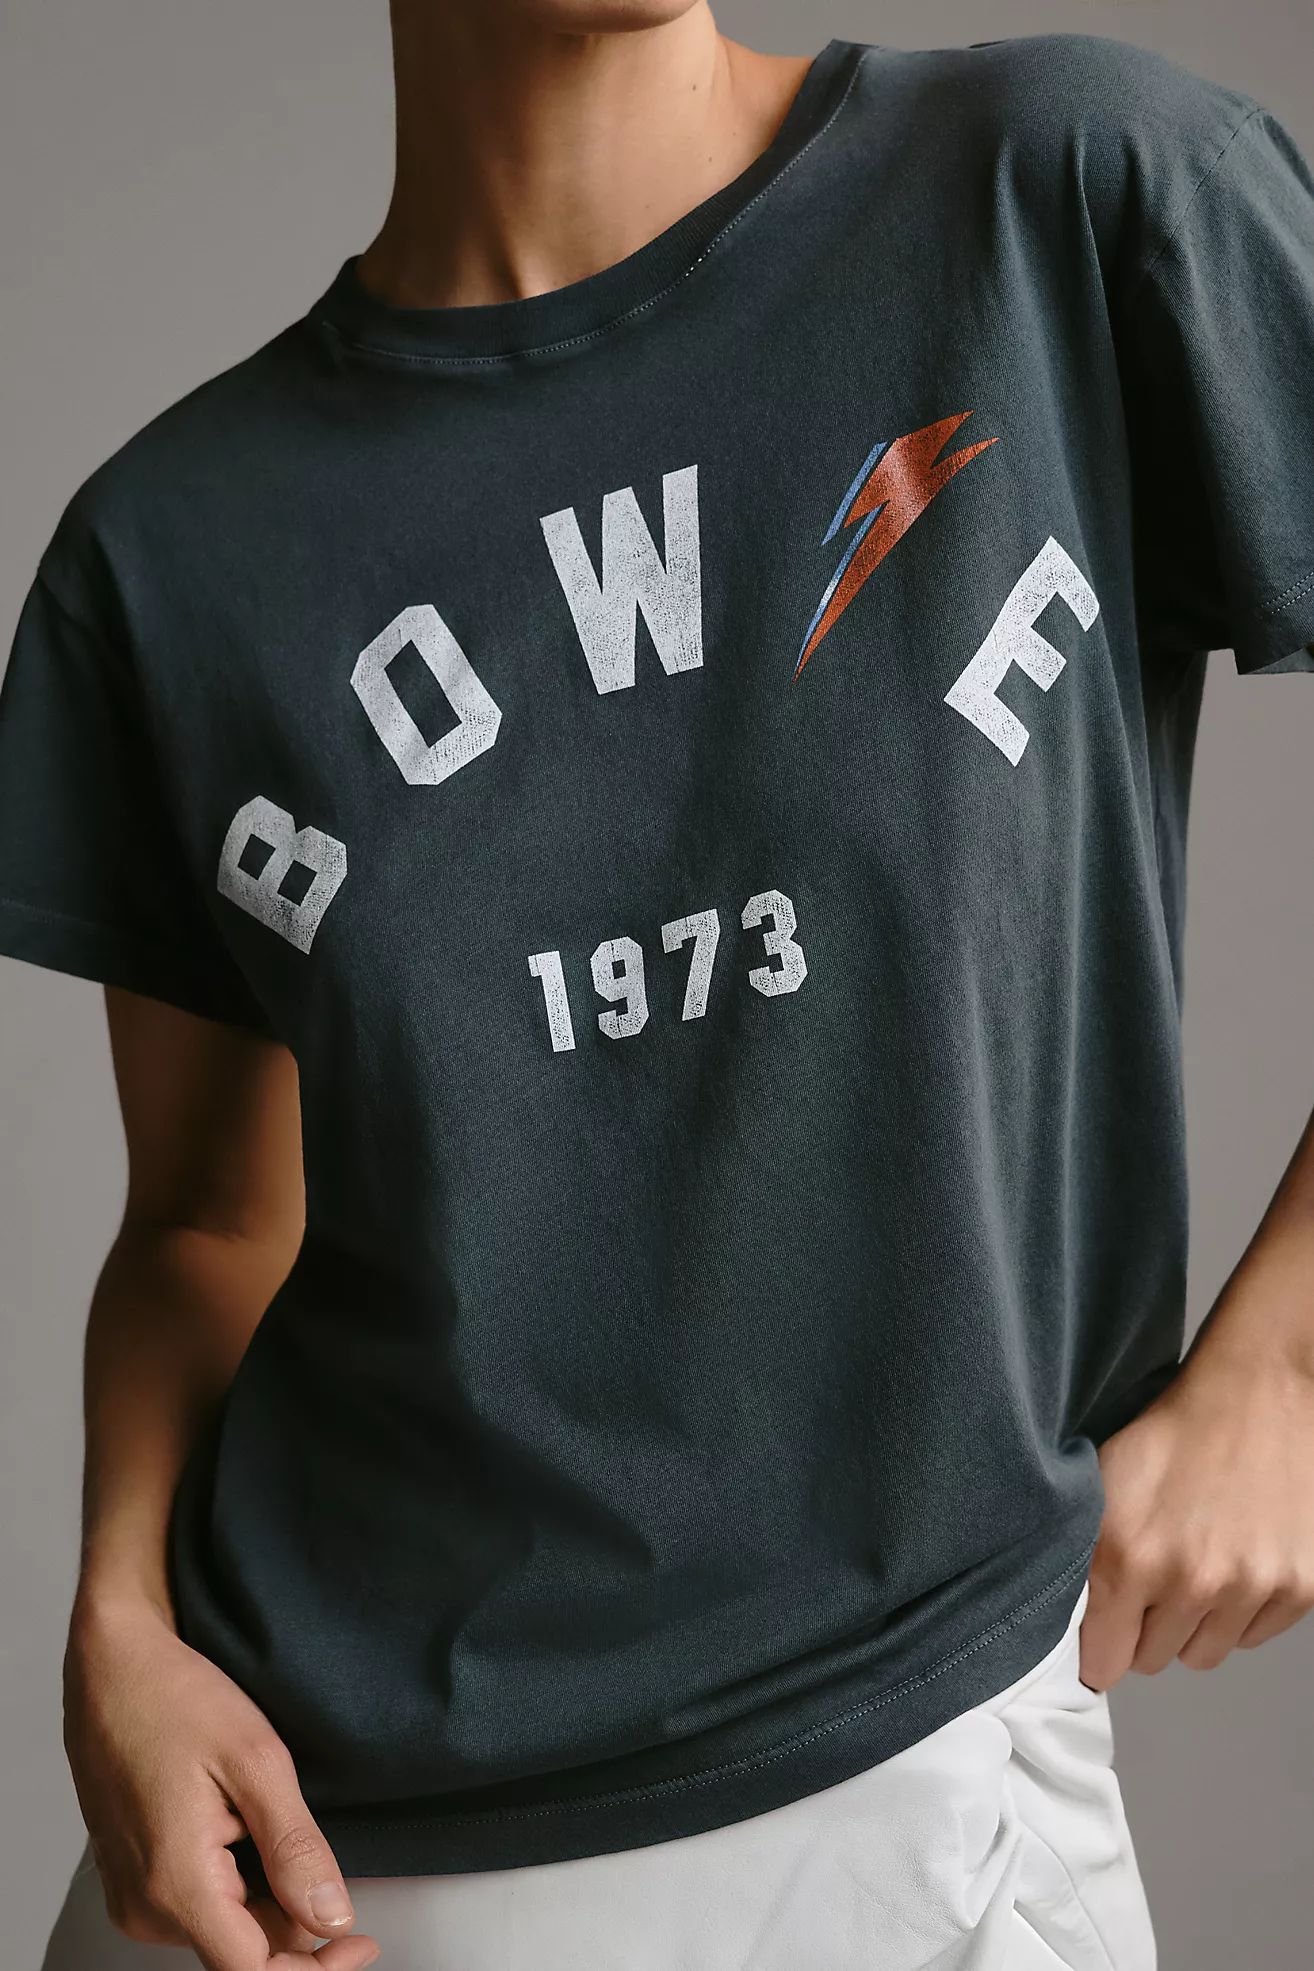 Bowie 1973 Tee | Anthropologie (US)